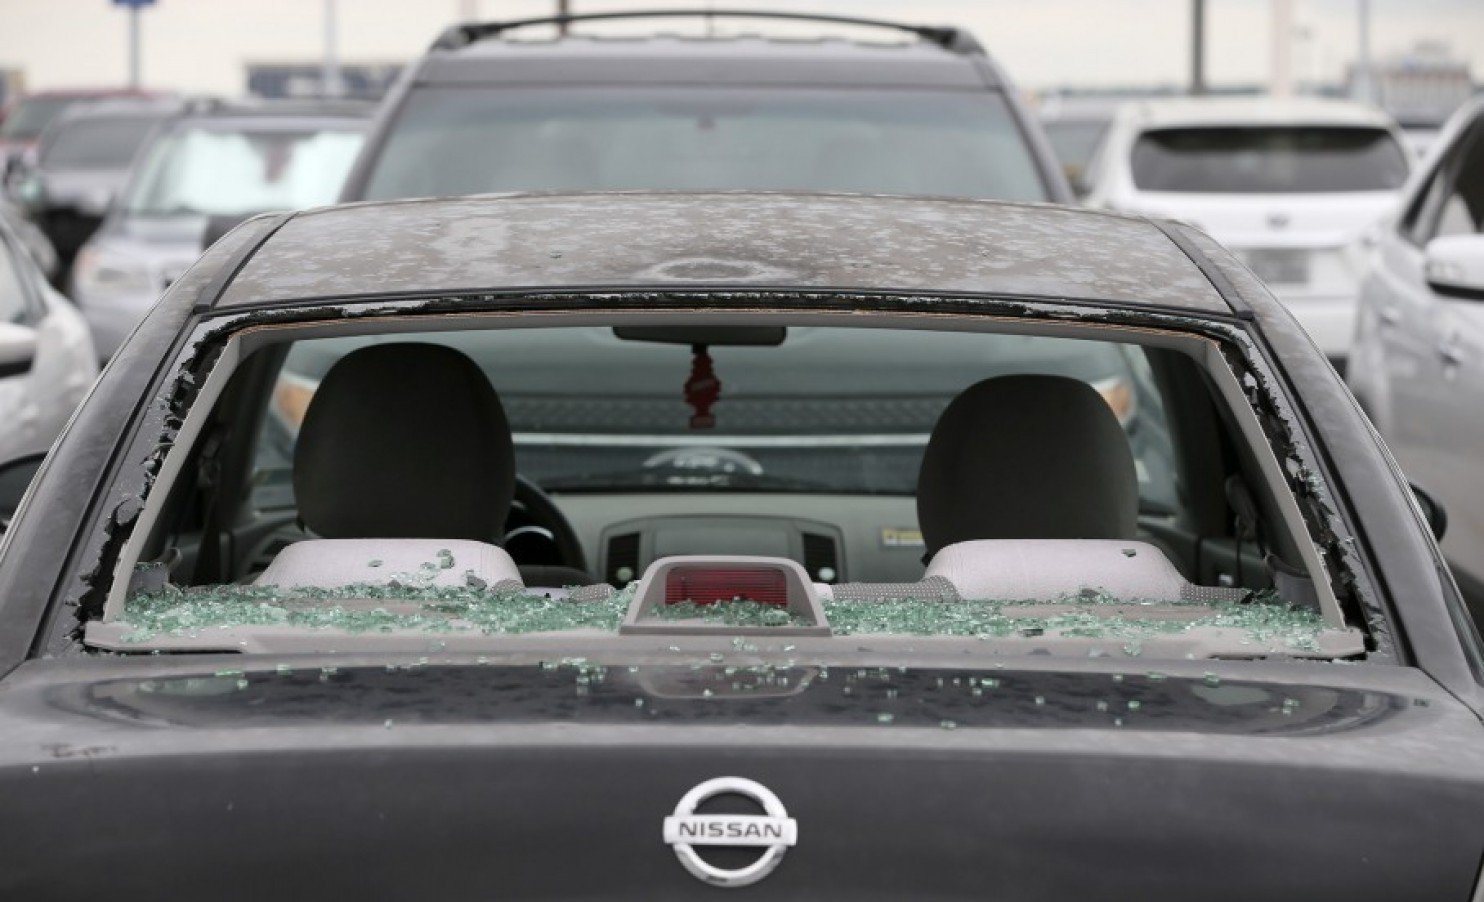 Some cars such as this Nissan were damaged at the San Antonio International Airport after a hail storm passed through the area recently on April 13, 2016. 